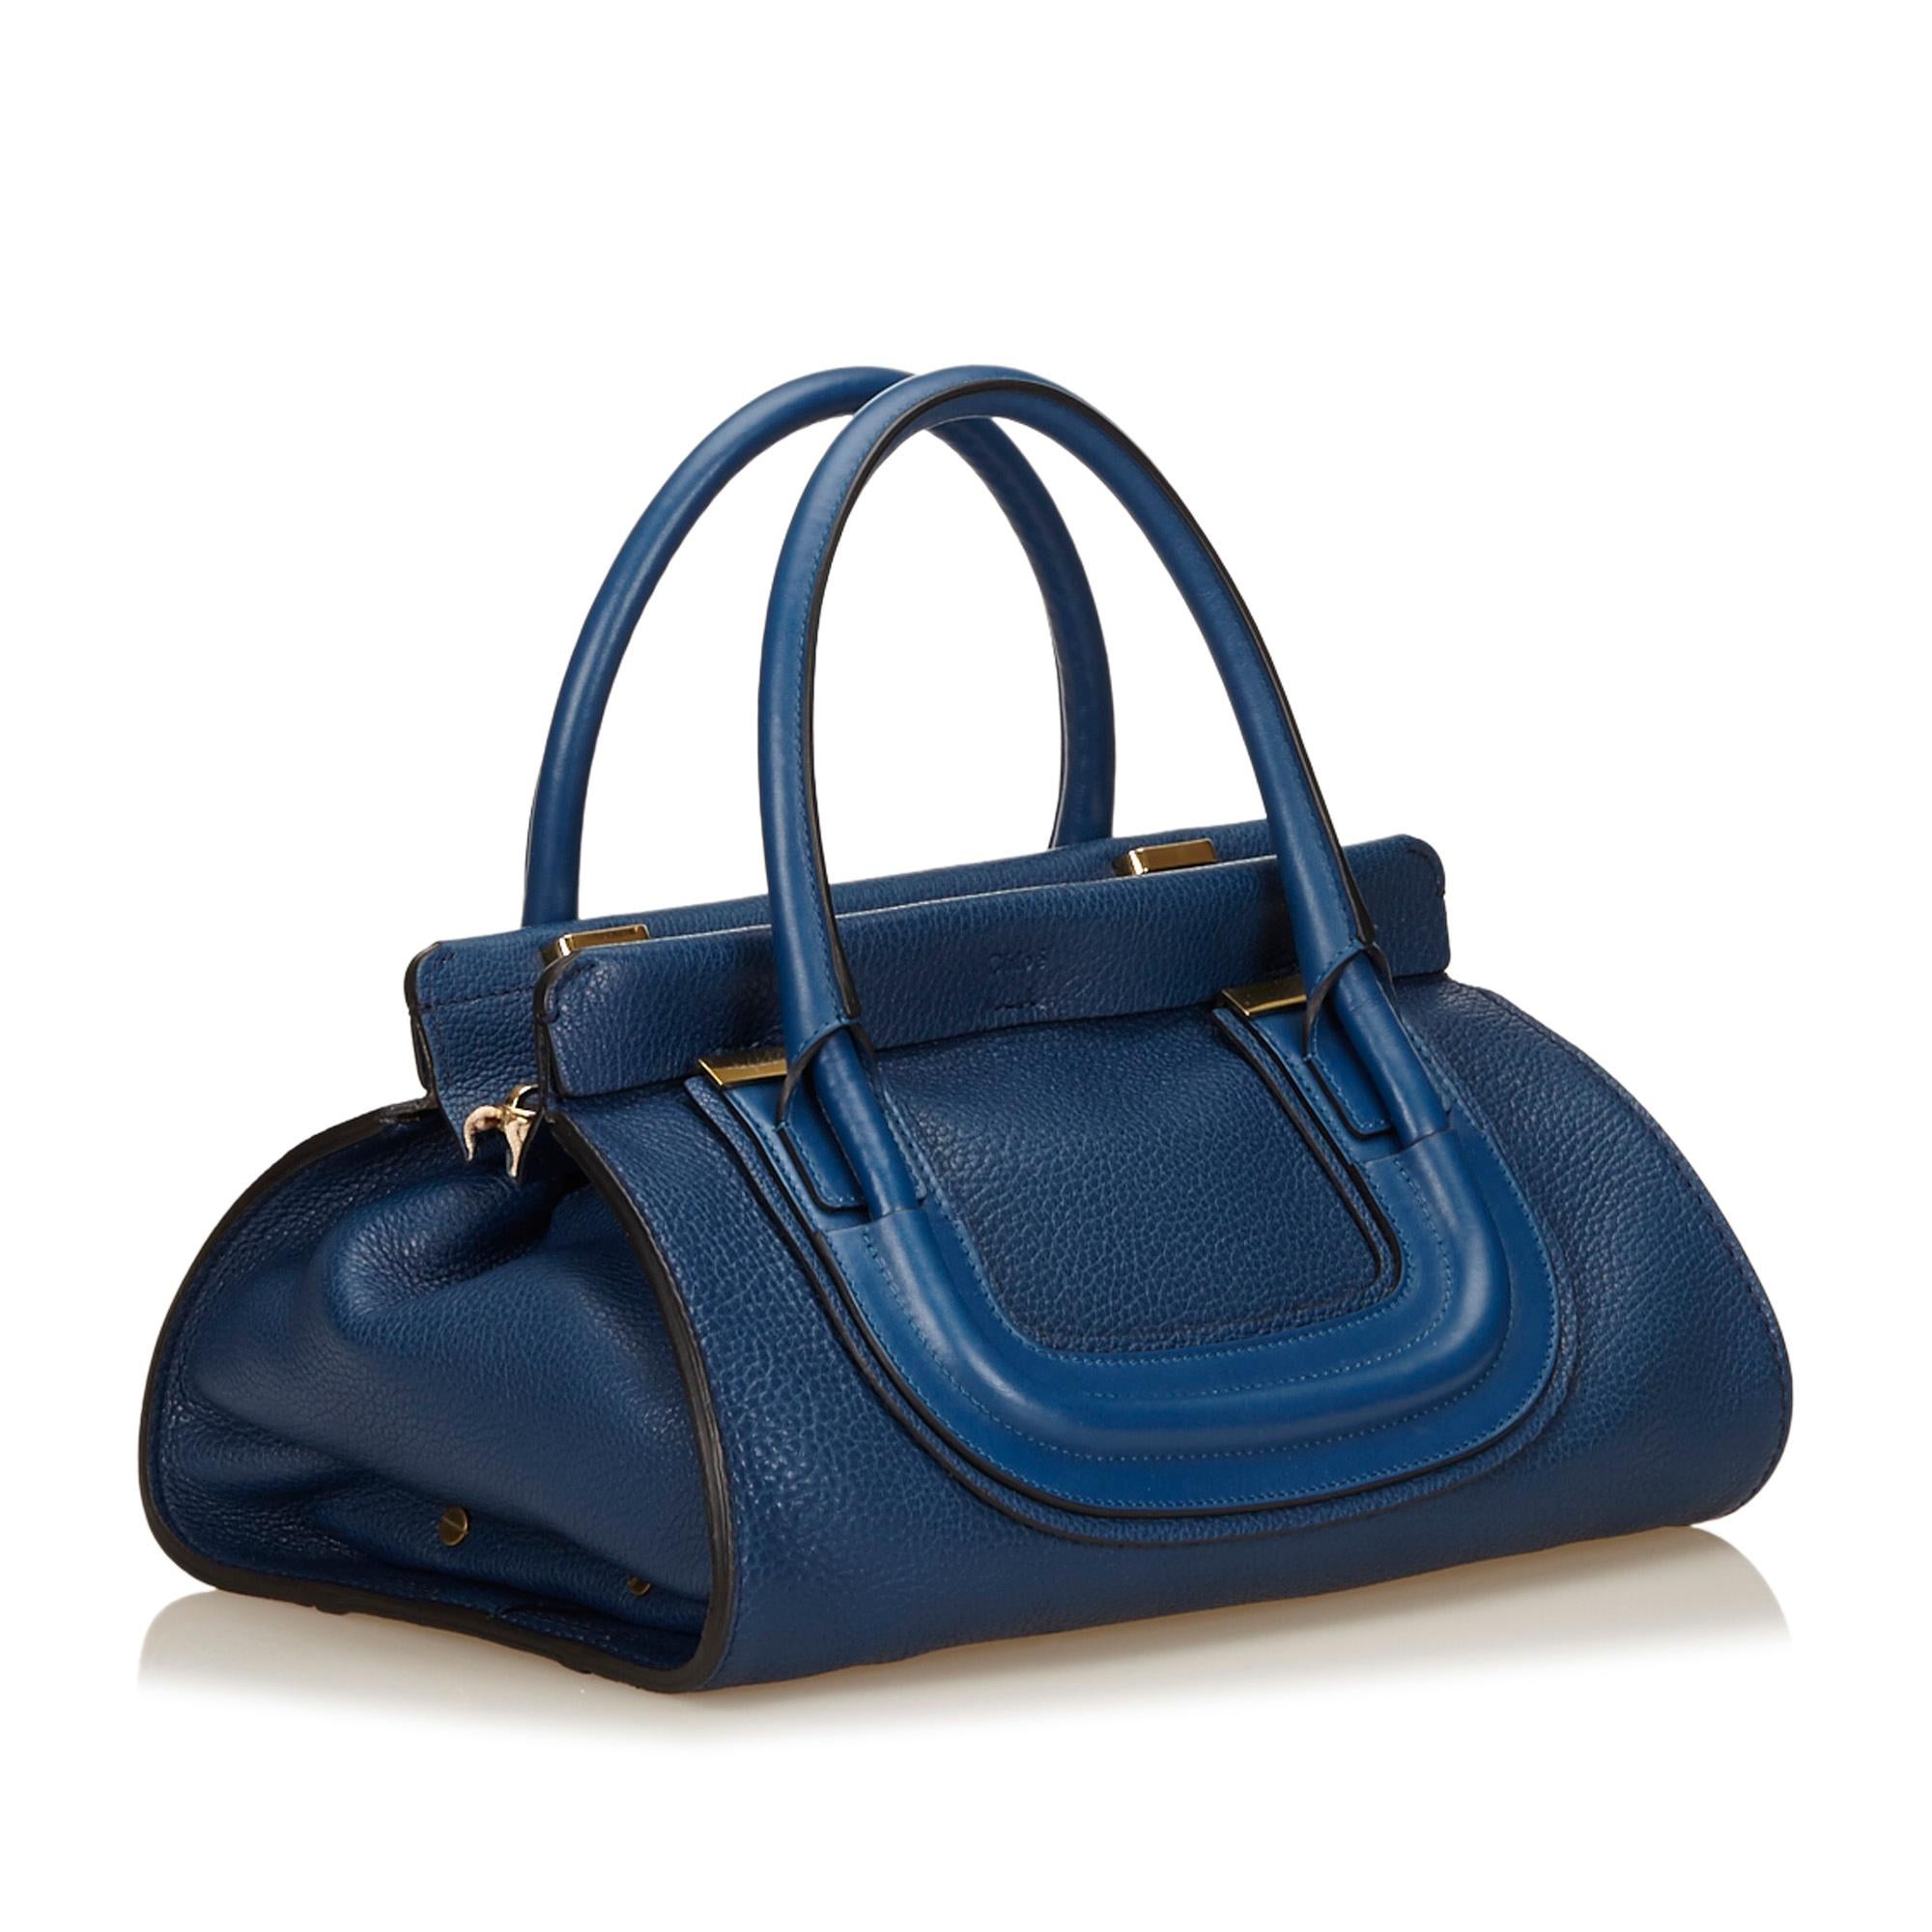 The Everston features a leather body, rolled handles with gold-tone hardware, a top zip closure, and an interior zip pocket. It carries as AB condition rating.

Inclusions: 
Dust Bag
Authenticity Card

Dimensions:
Length: 33.00 cm
Width: 21.00